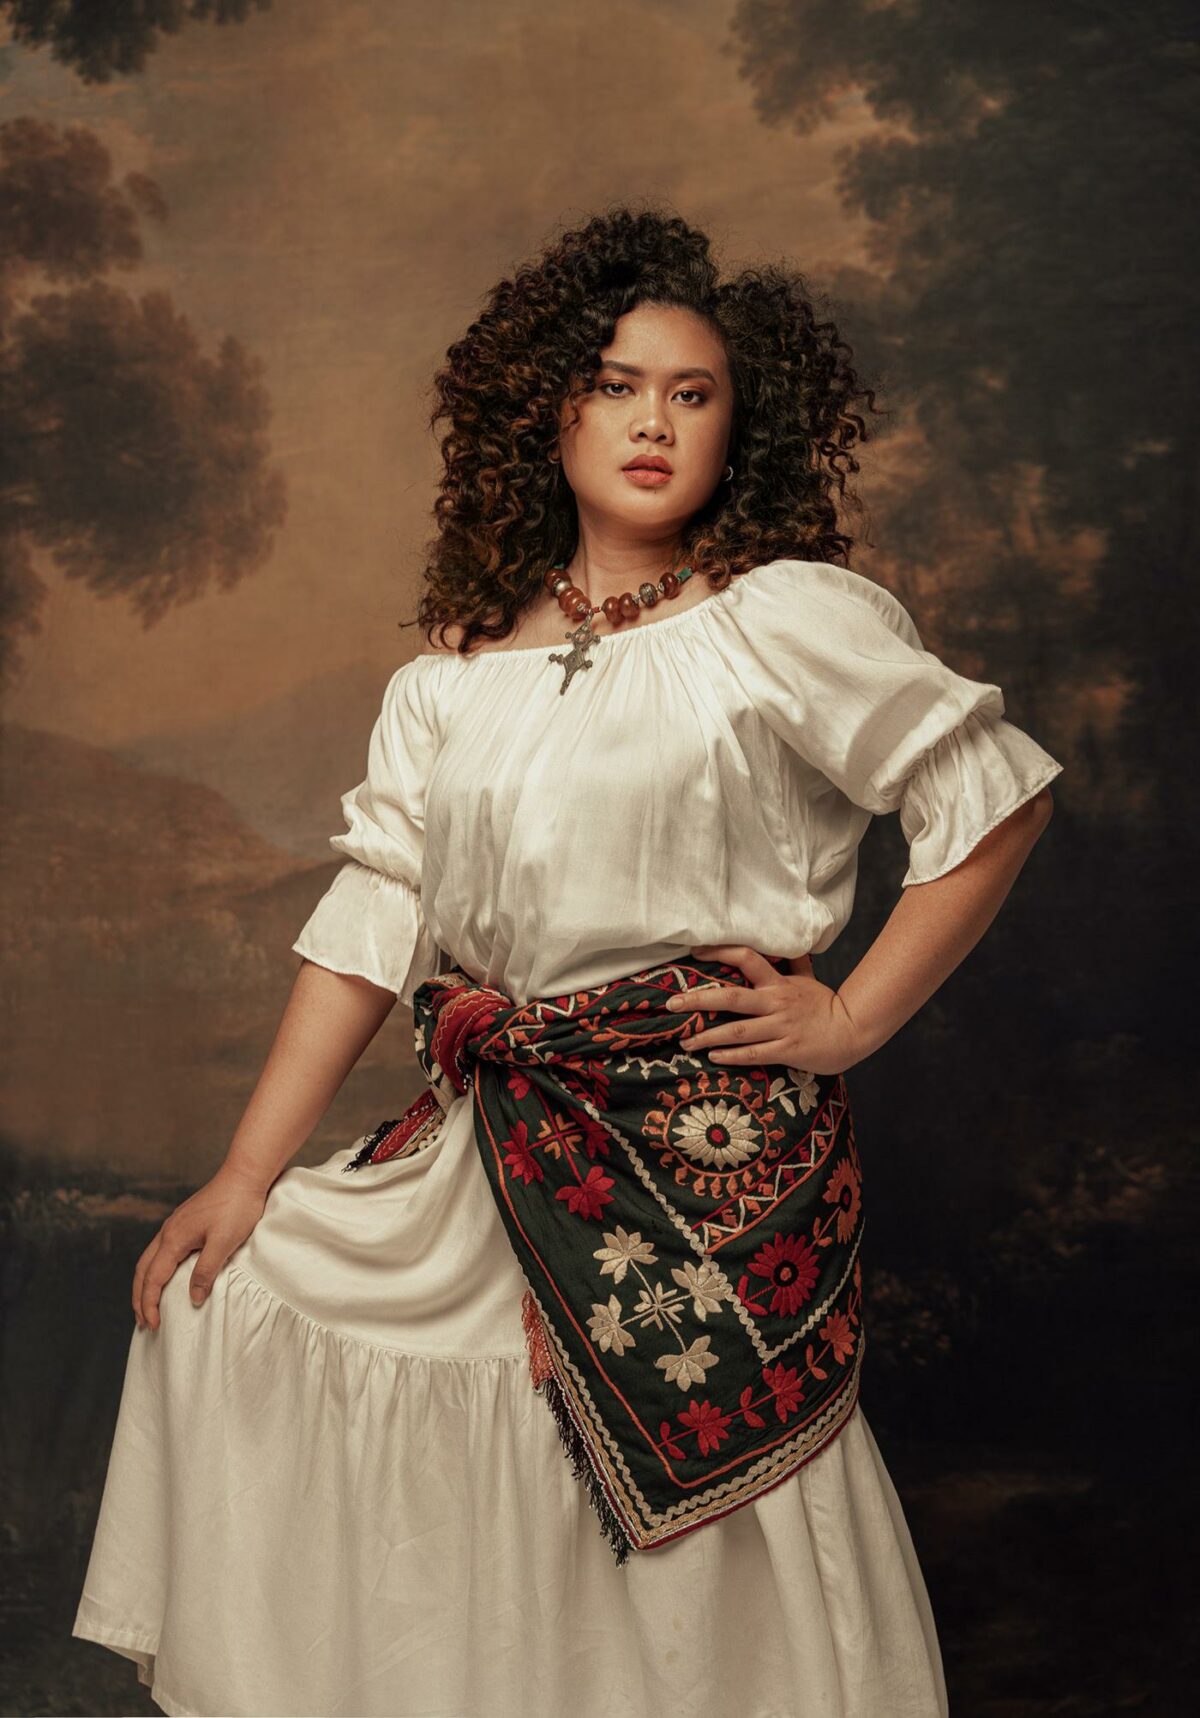 Project Puan A Gorgeous And Delicate Portrait Series On Indonesian Women By Nicoline Patricia Malina 18